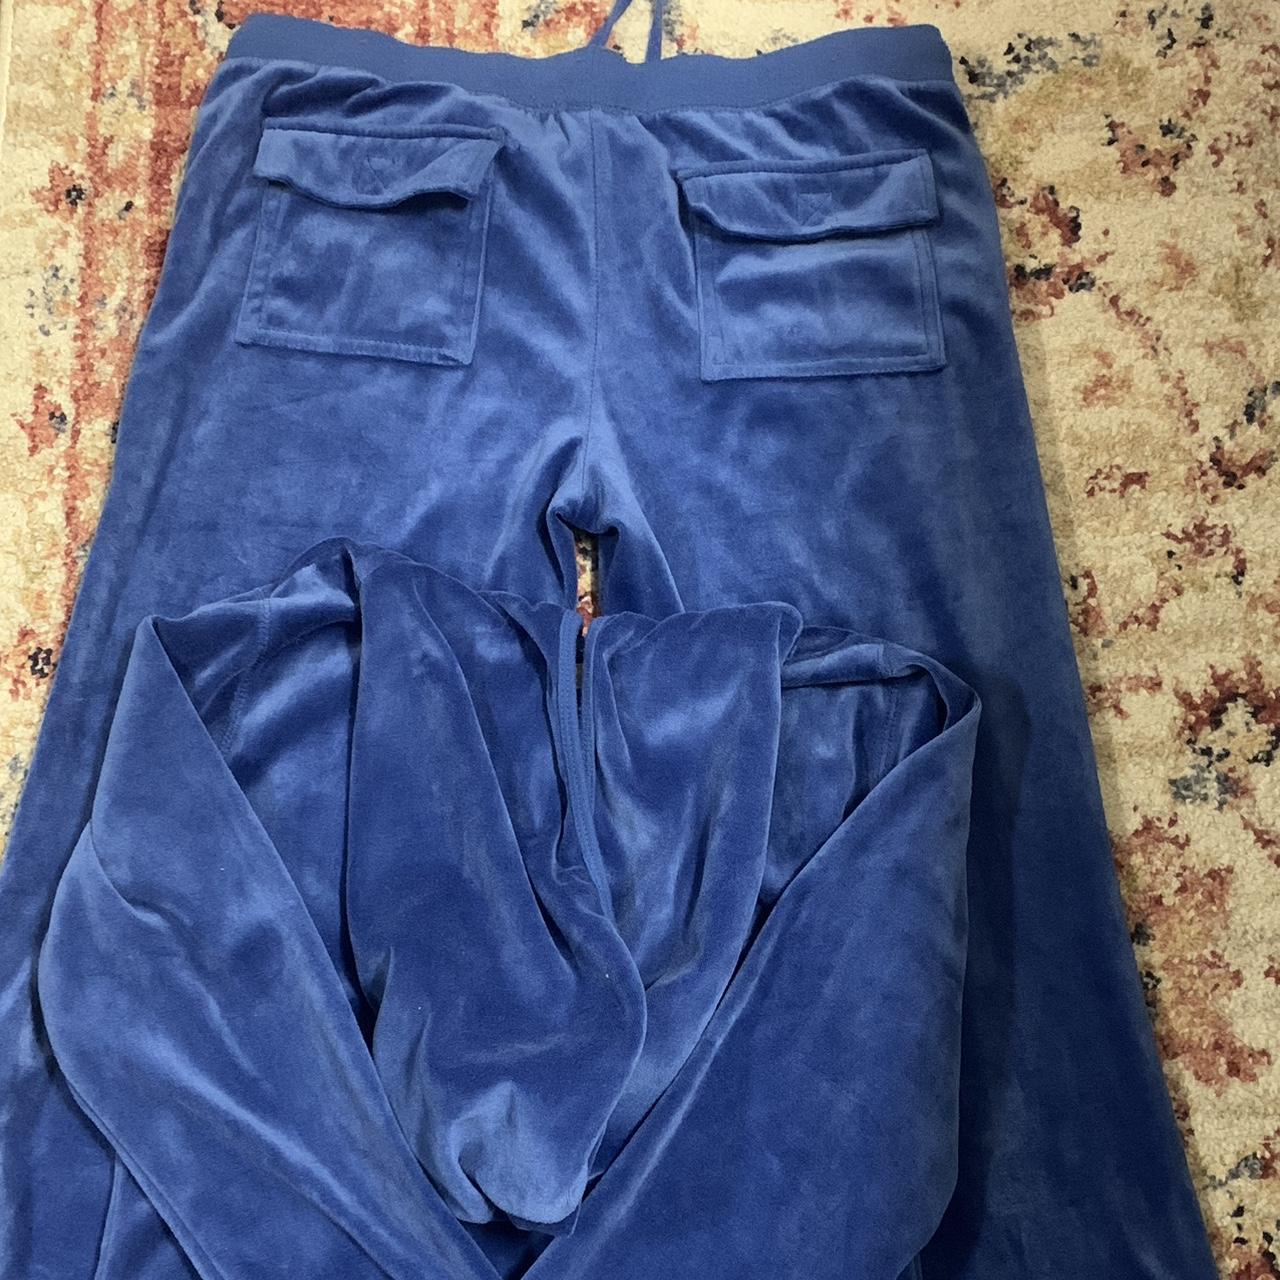 Women's Blue and Navy Joggers-tracksuits (2)